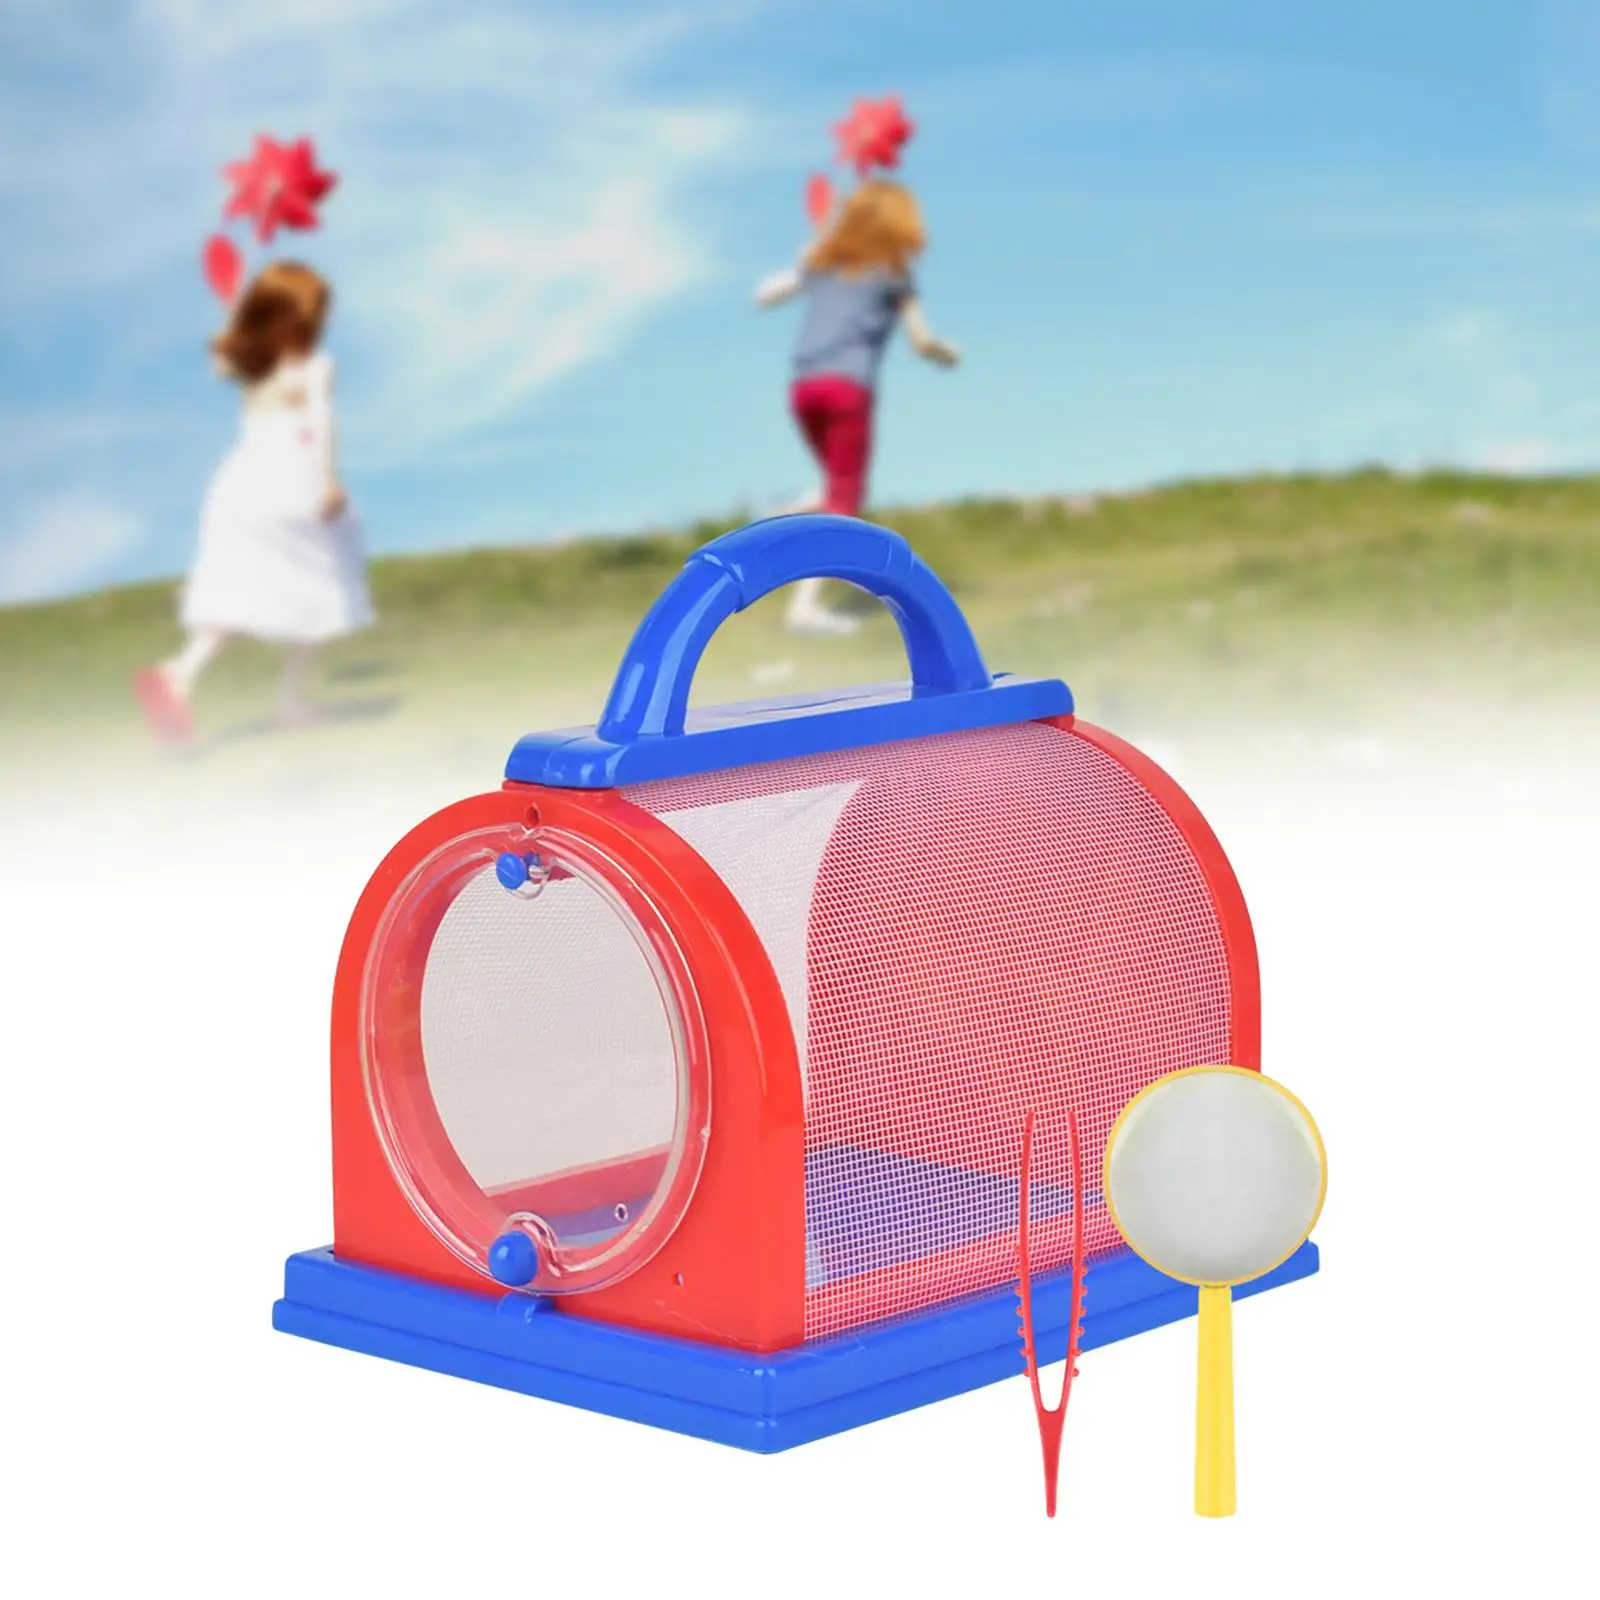 Butterfly Exploration Activity Portable Cage Observe Viewer Container for Outdoor Childs Toy DIY Experiments Camping Hiking